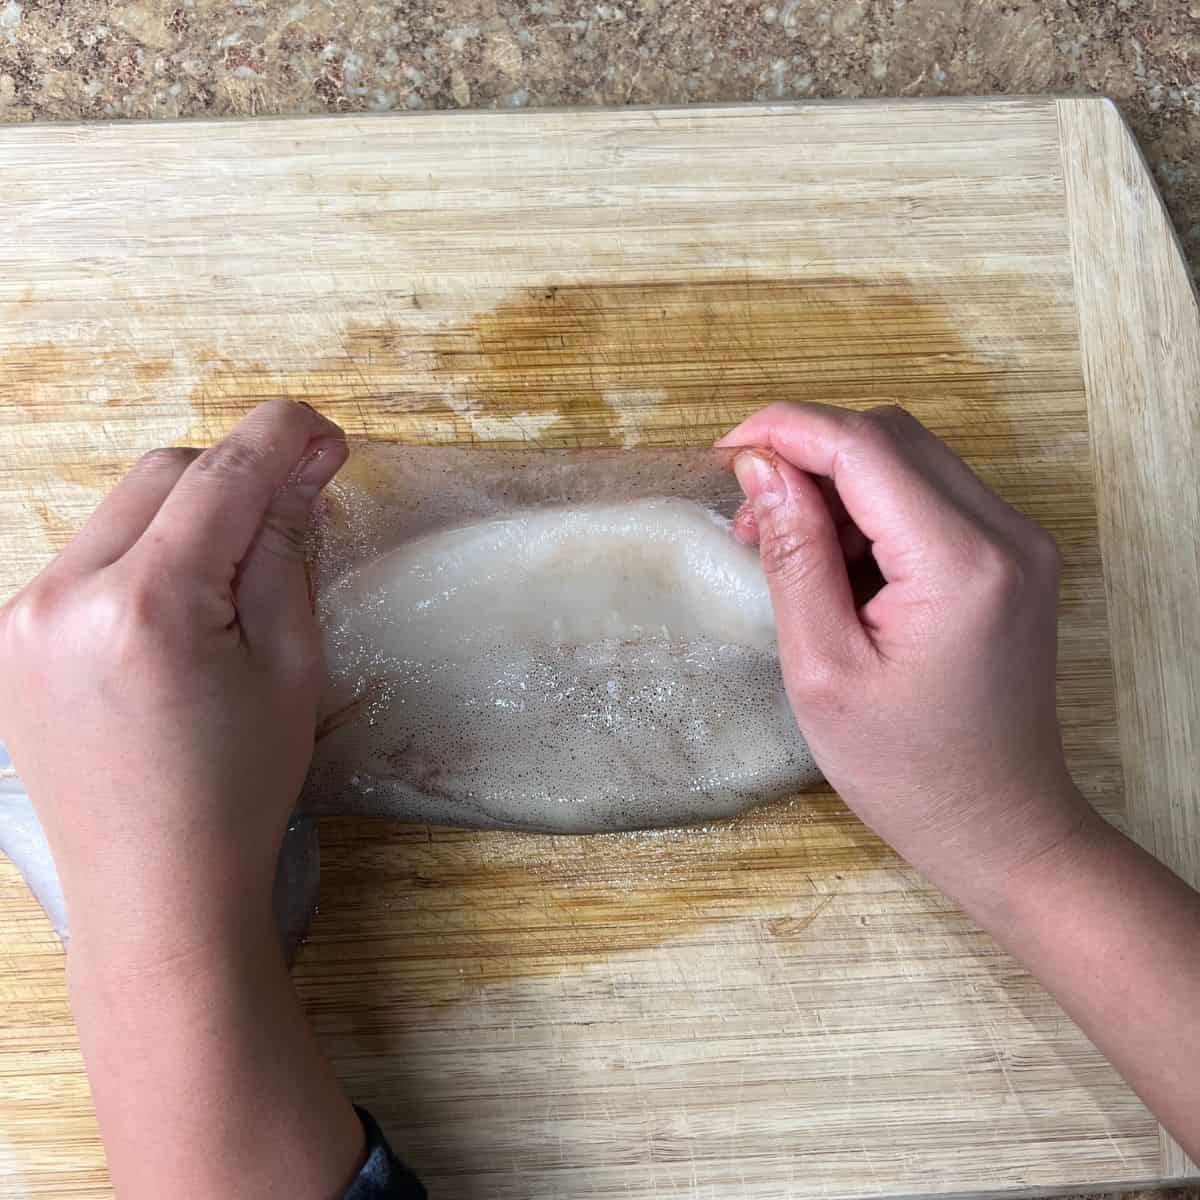 Removing the peel from the squid.